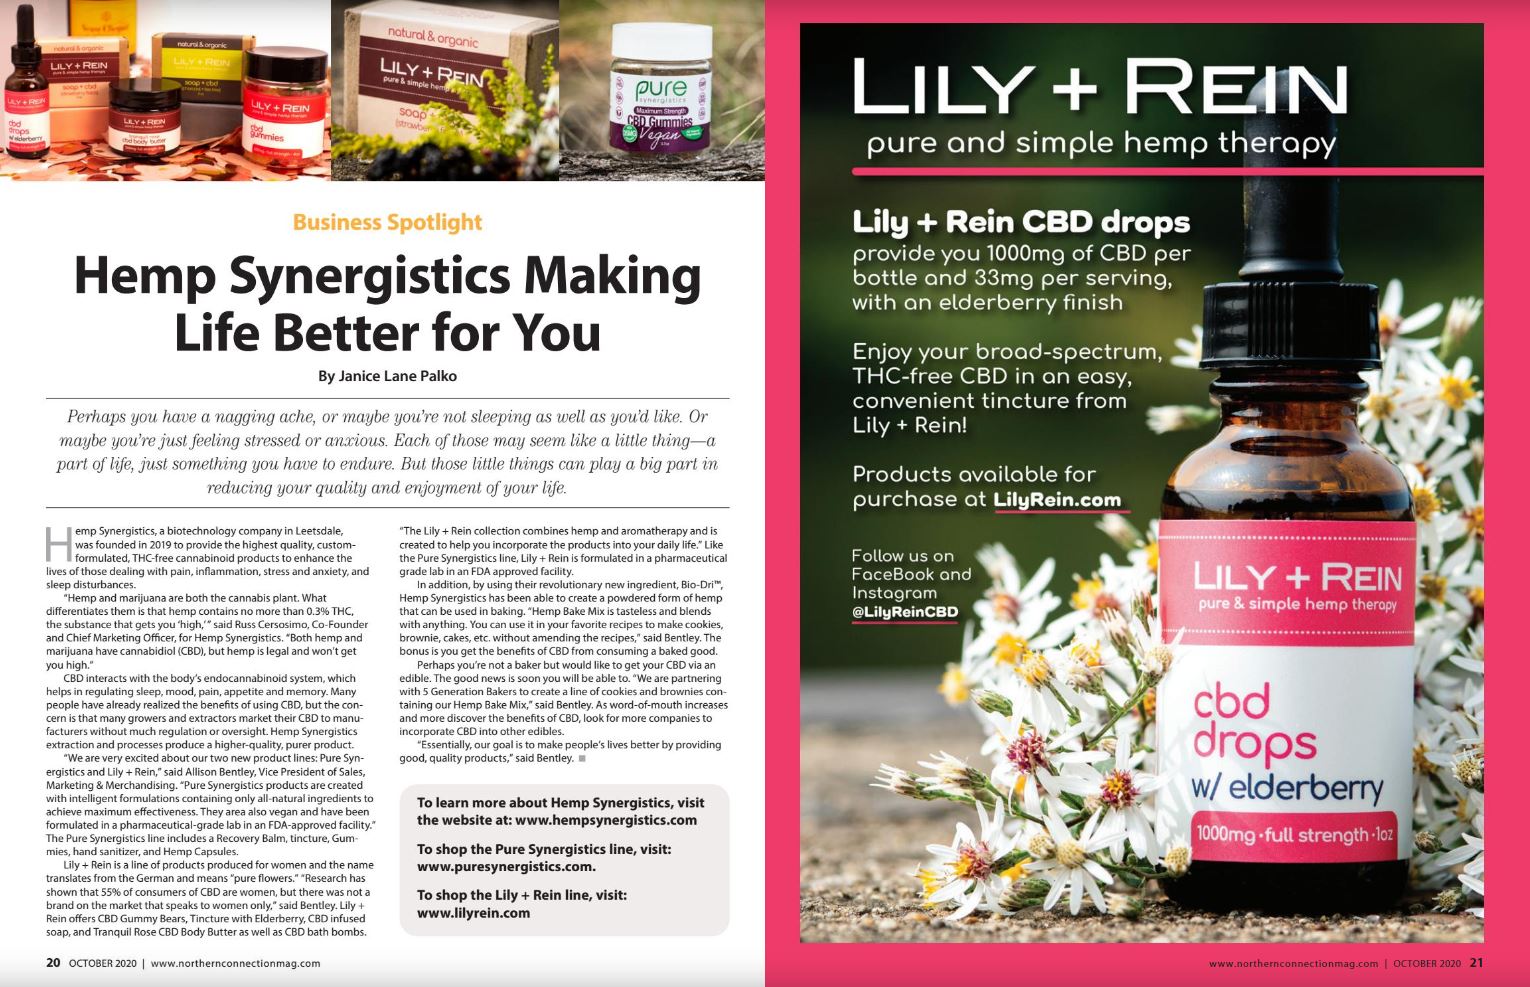 Hemp Synergistics featured in Northern Connection Magazine